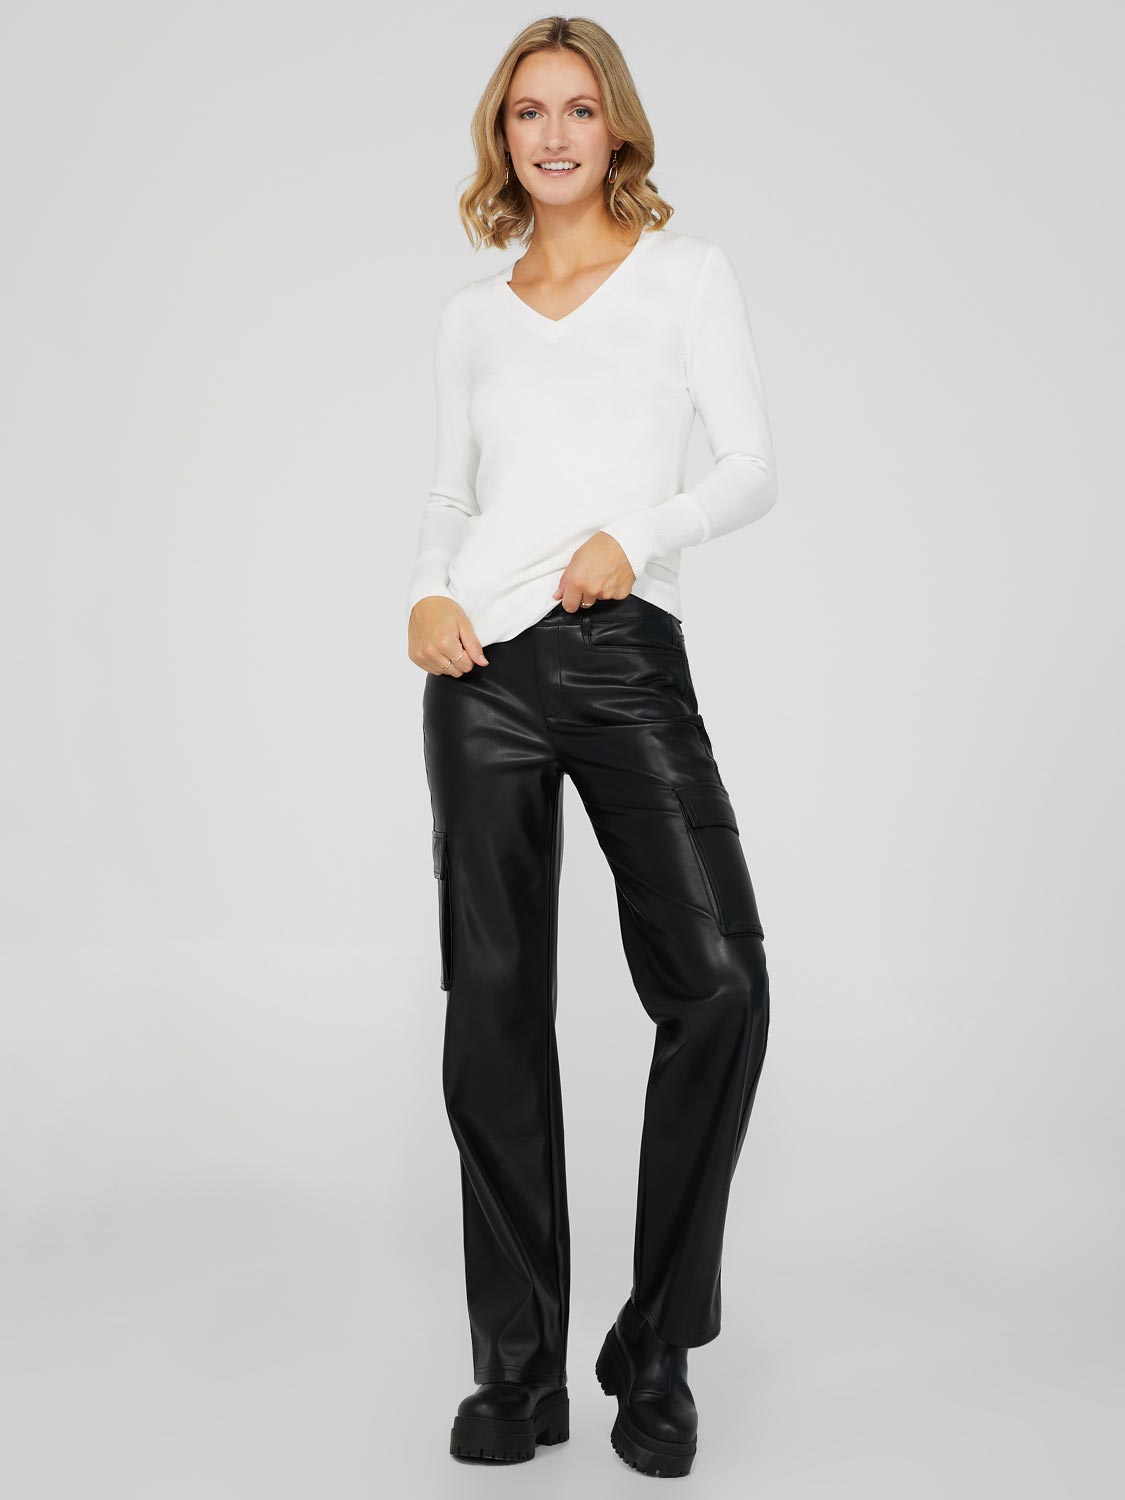 Autumn Skinny Leather Petite Faux Leather Trousers With Zipper And High  Waist Design Sexy Open Front, Solid PU, Stretchy And Comfortable From  Yunini, $24.67